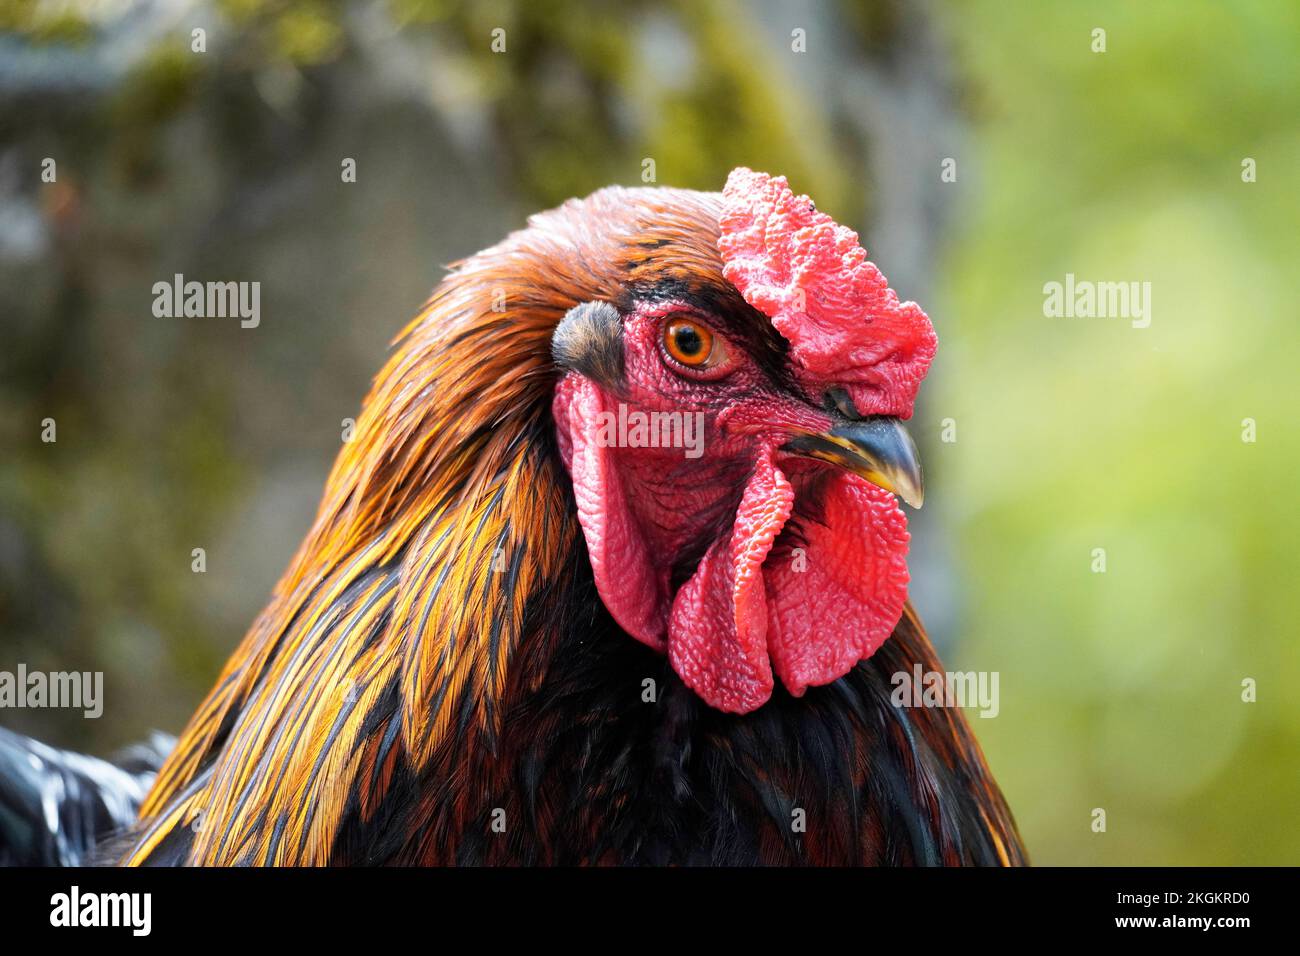 Portrait of a rooster. Stock Photo